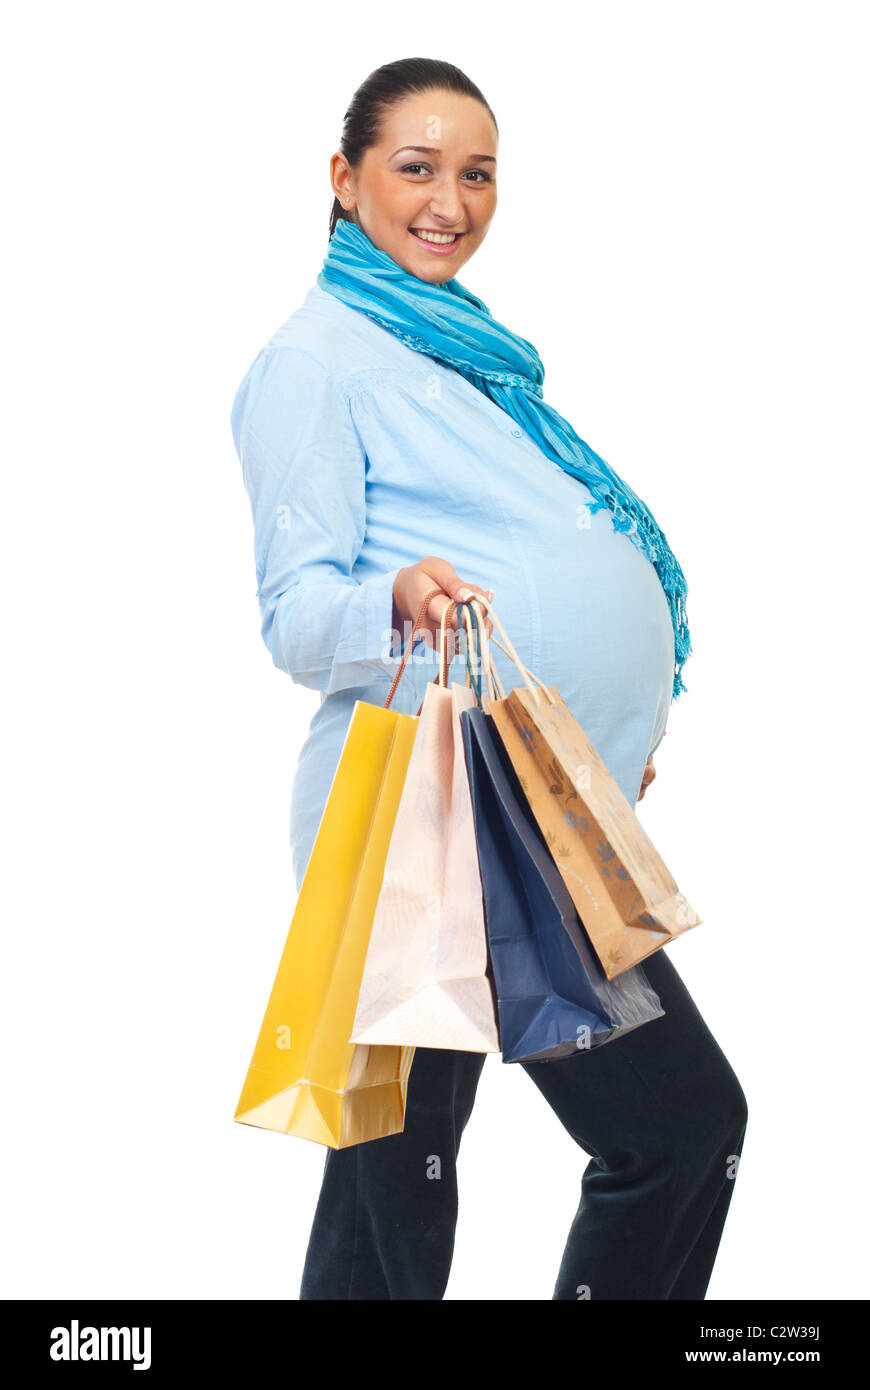 Cheerful pregnant woman nine months holding shopping bags isolated on white background Stock Photo